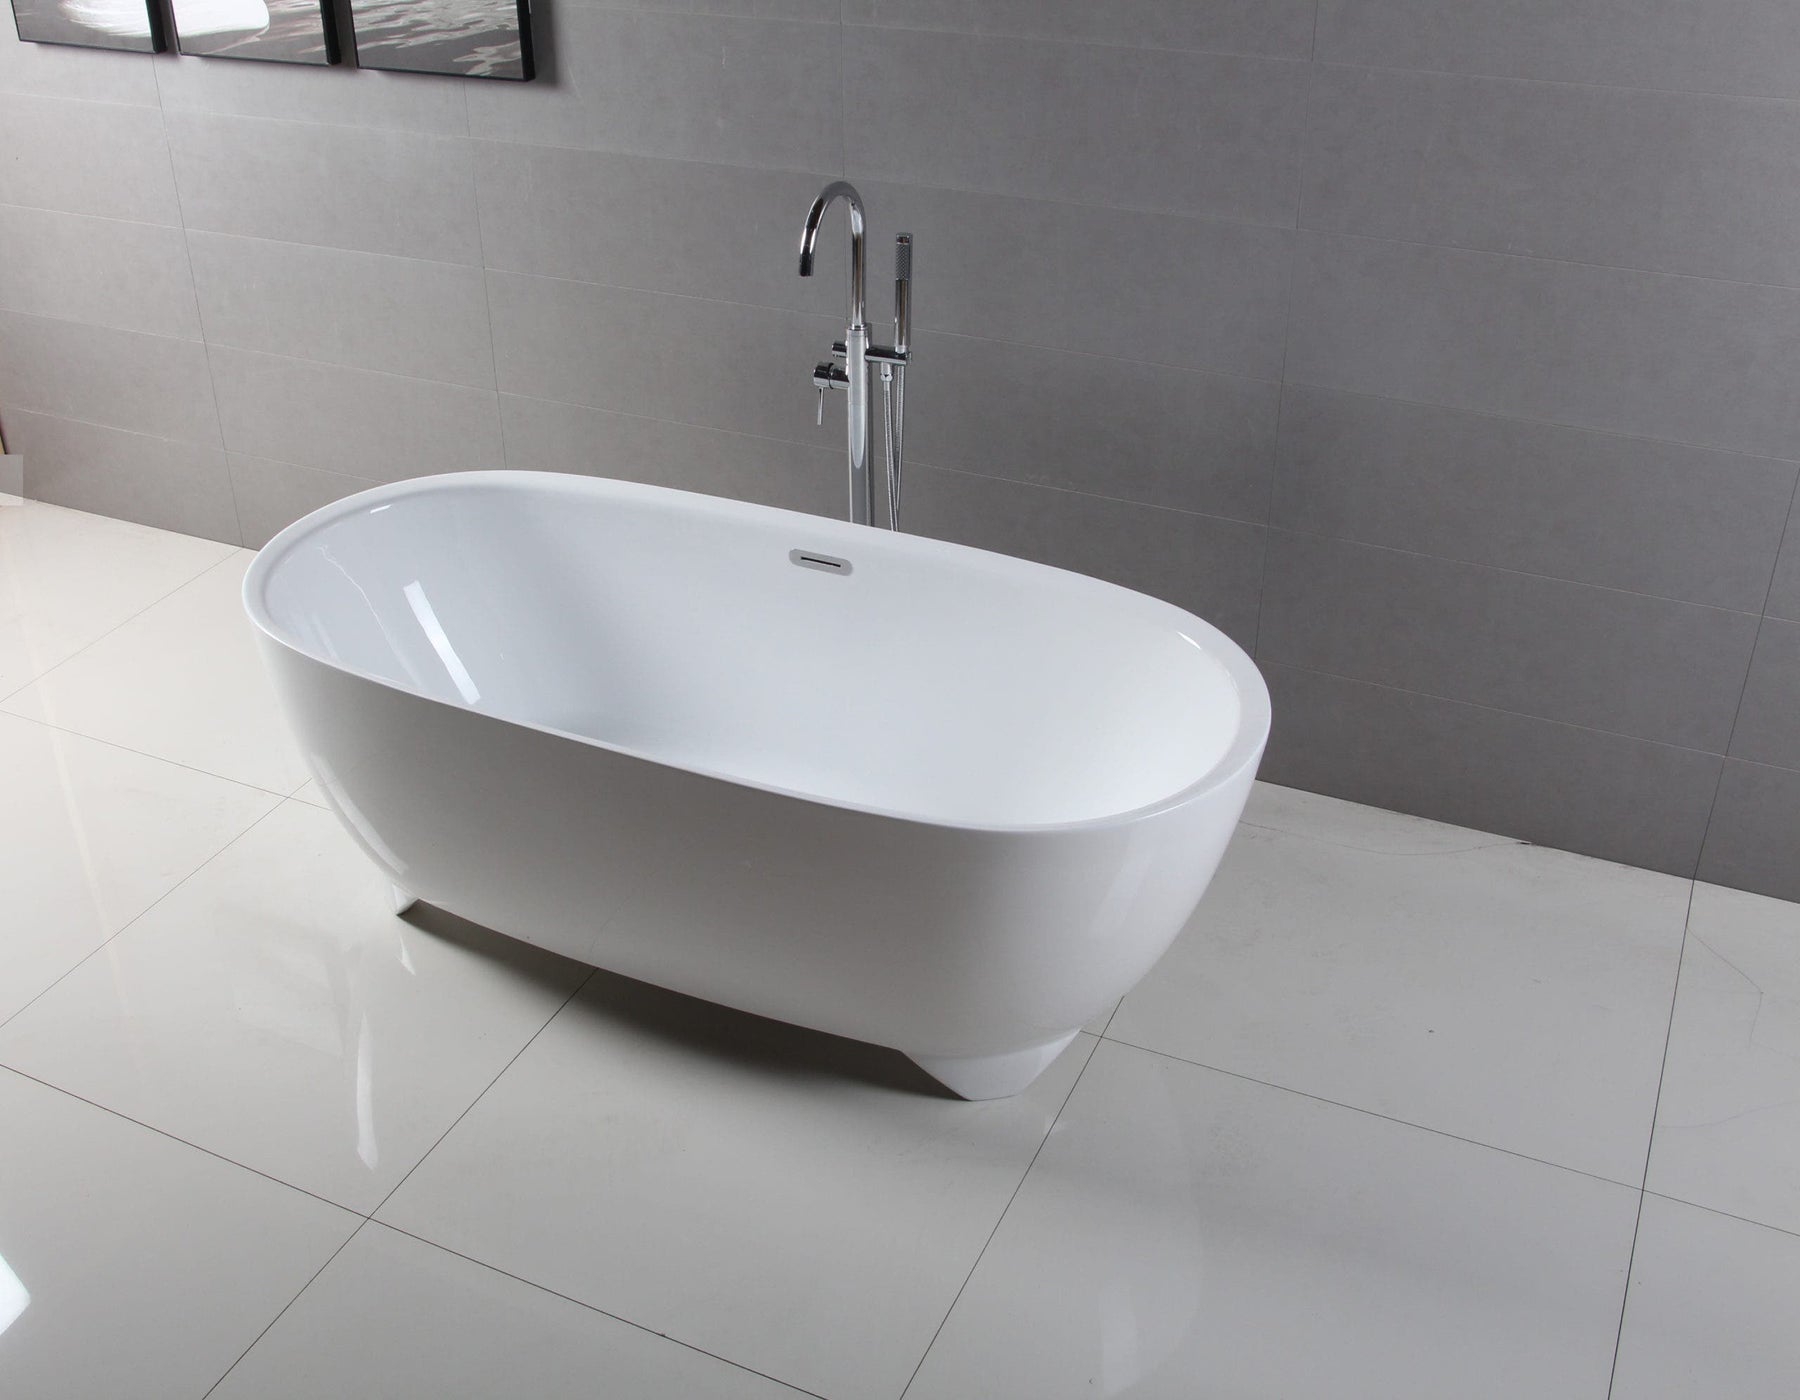 Kingston Brass Features Top-of-the-Line PMMA Acrylic for Bathtubs and Other Products